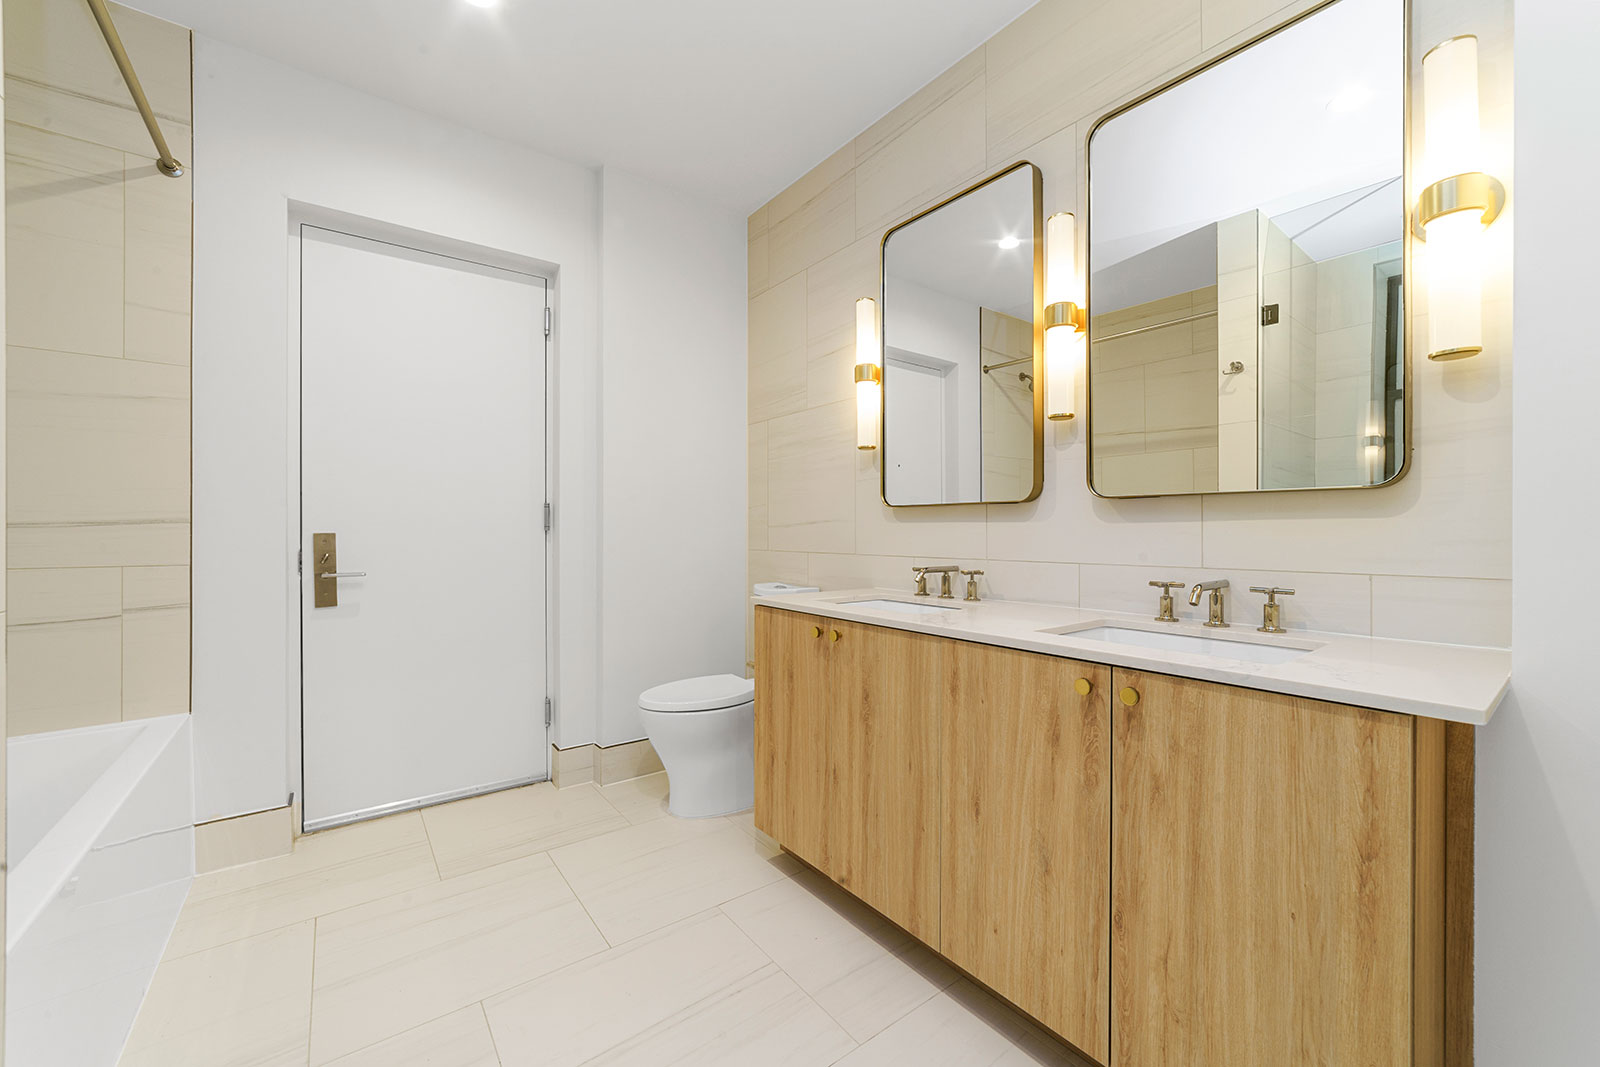 Pet-Friendly Apartments in Upper West Side Manhattan, NY - 125 Riverside - Bathroom with Tile Floors and Walls, Light Wood-Style Cabinets, 2 Mirrors, a White Bathtub and Toilet, and Stylish Decor